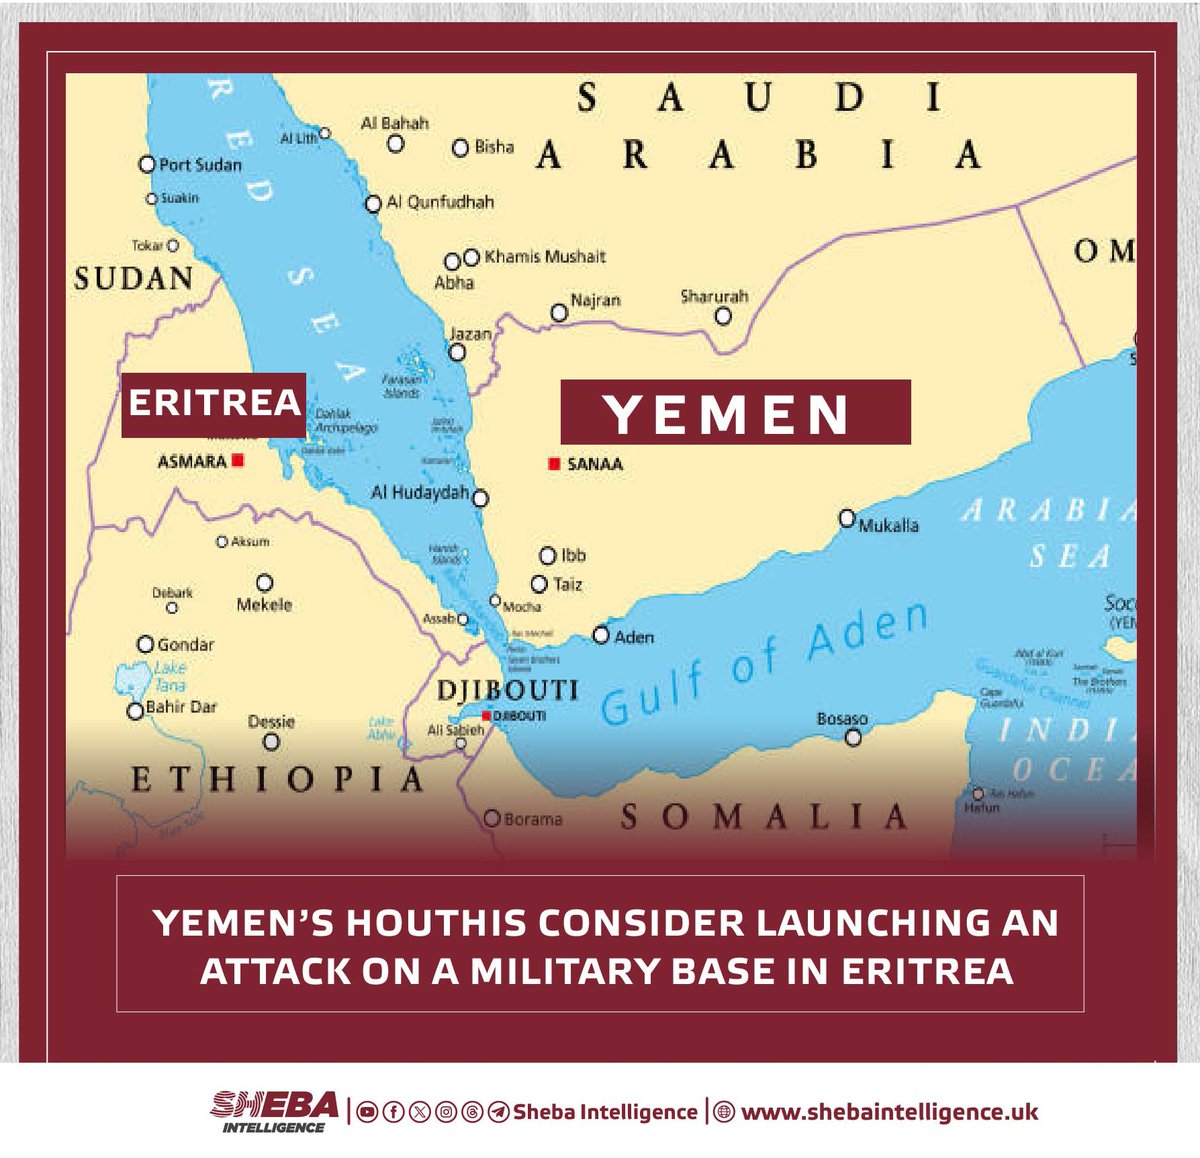 Yemen’s Houthis Consider Launching an Attack on a Military Base in Eritrea from the Iranian Revolutionary Guard and senior Ansar Allah (Houthi) military leaders agreed in a meeting in Sanaa to launch missile attacks against military bases that supply international forces in the…